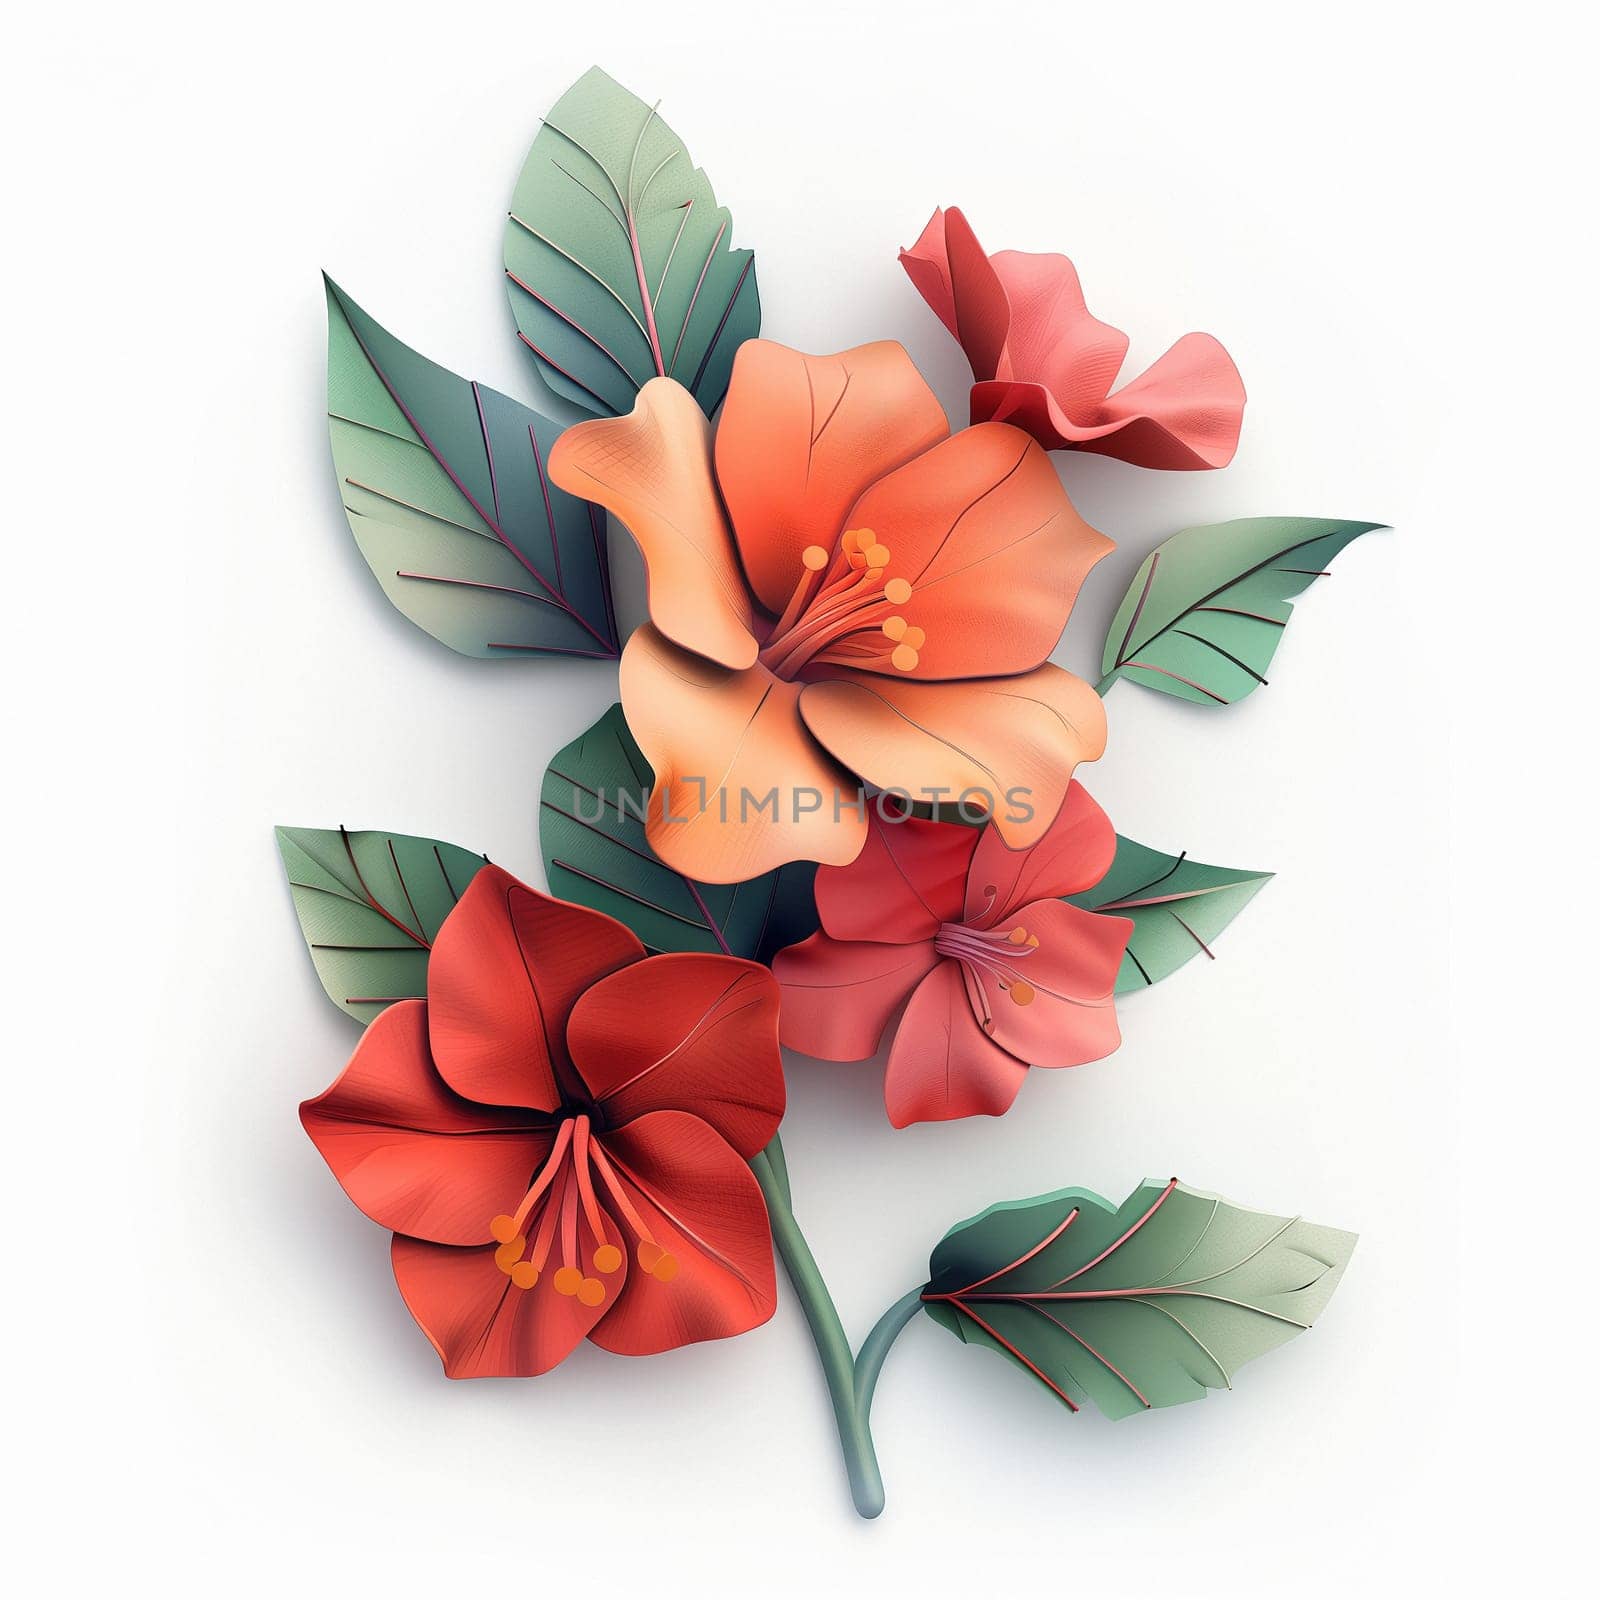 A composition of 3D flowers on an isolated white background by NeuroSky